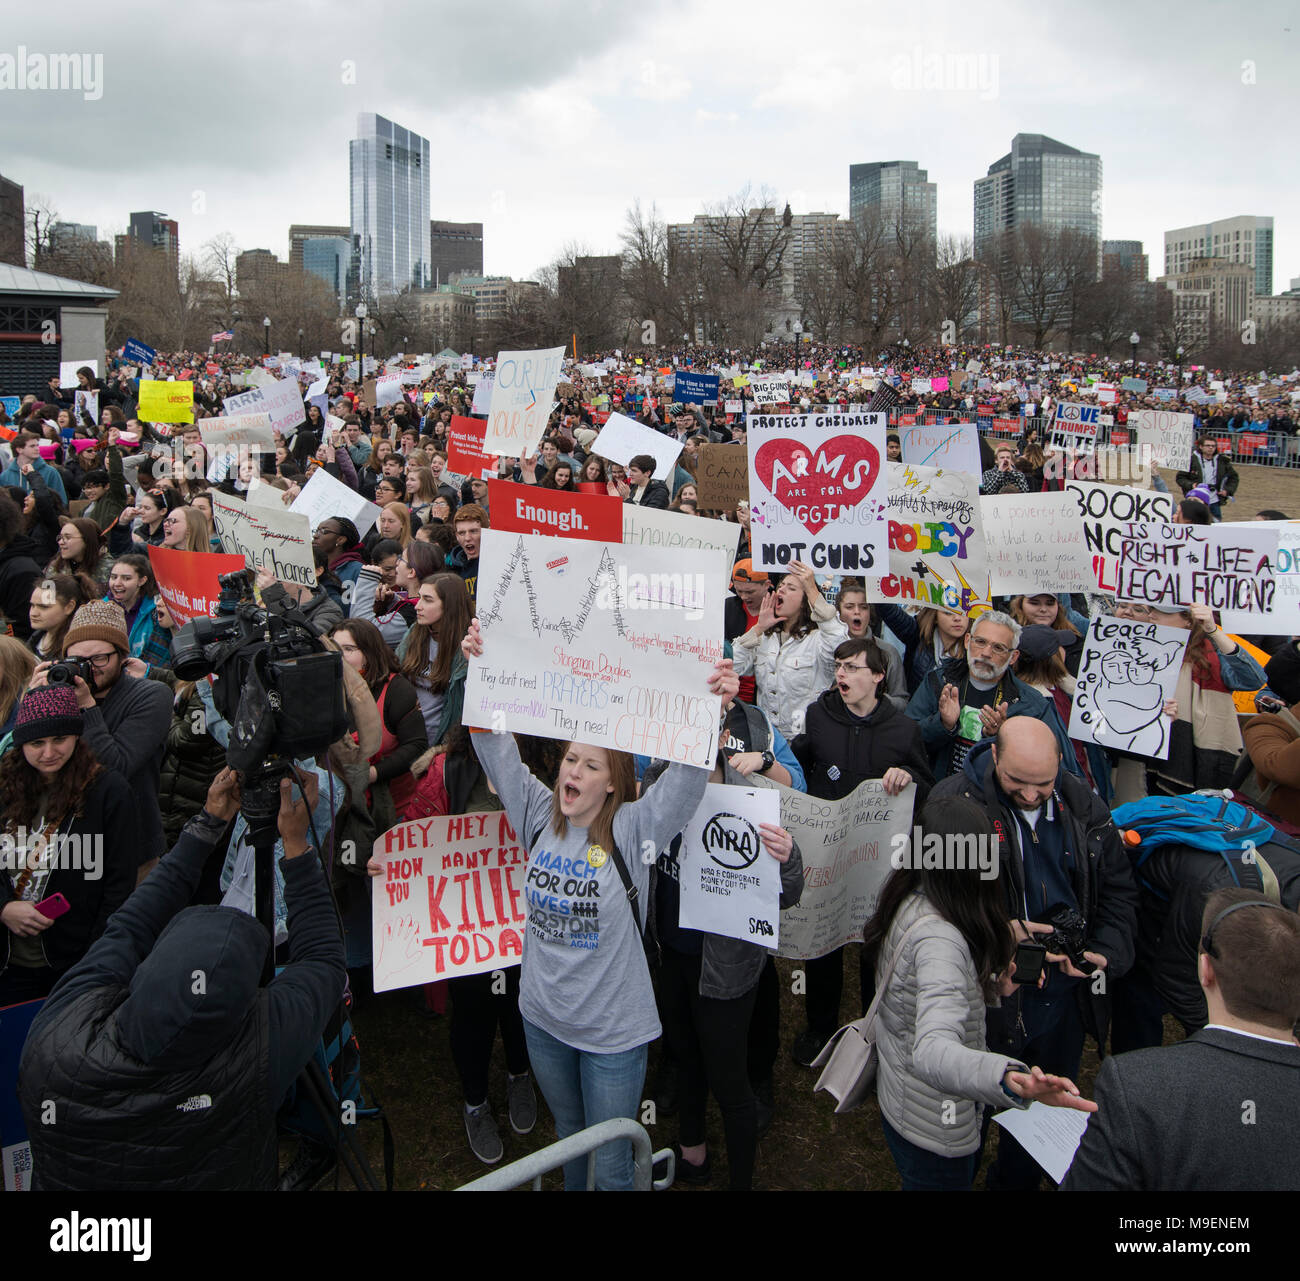 March For Our Lives, Boston, Massachusetts, USA 3-24-2018:  An estimated crowd of over 100,000 People gathered on the Boston Common during the March For Our Lives anti-gun demonstration. March For Our Lives demonstrations took place in most major U.S. cites and around the world on March 24th 2018. March For Our Lives demonstrations were a reaction to the school shooting at Marjory Stoneman Douglas High School on Valentine’s Day of 2018 in Parkland Florida, USA.  The shooting in Florida left 17 high school students dead. Credit: Chuck Nacke / Alamy Live News Stock Photo